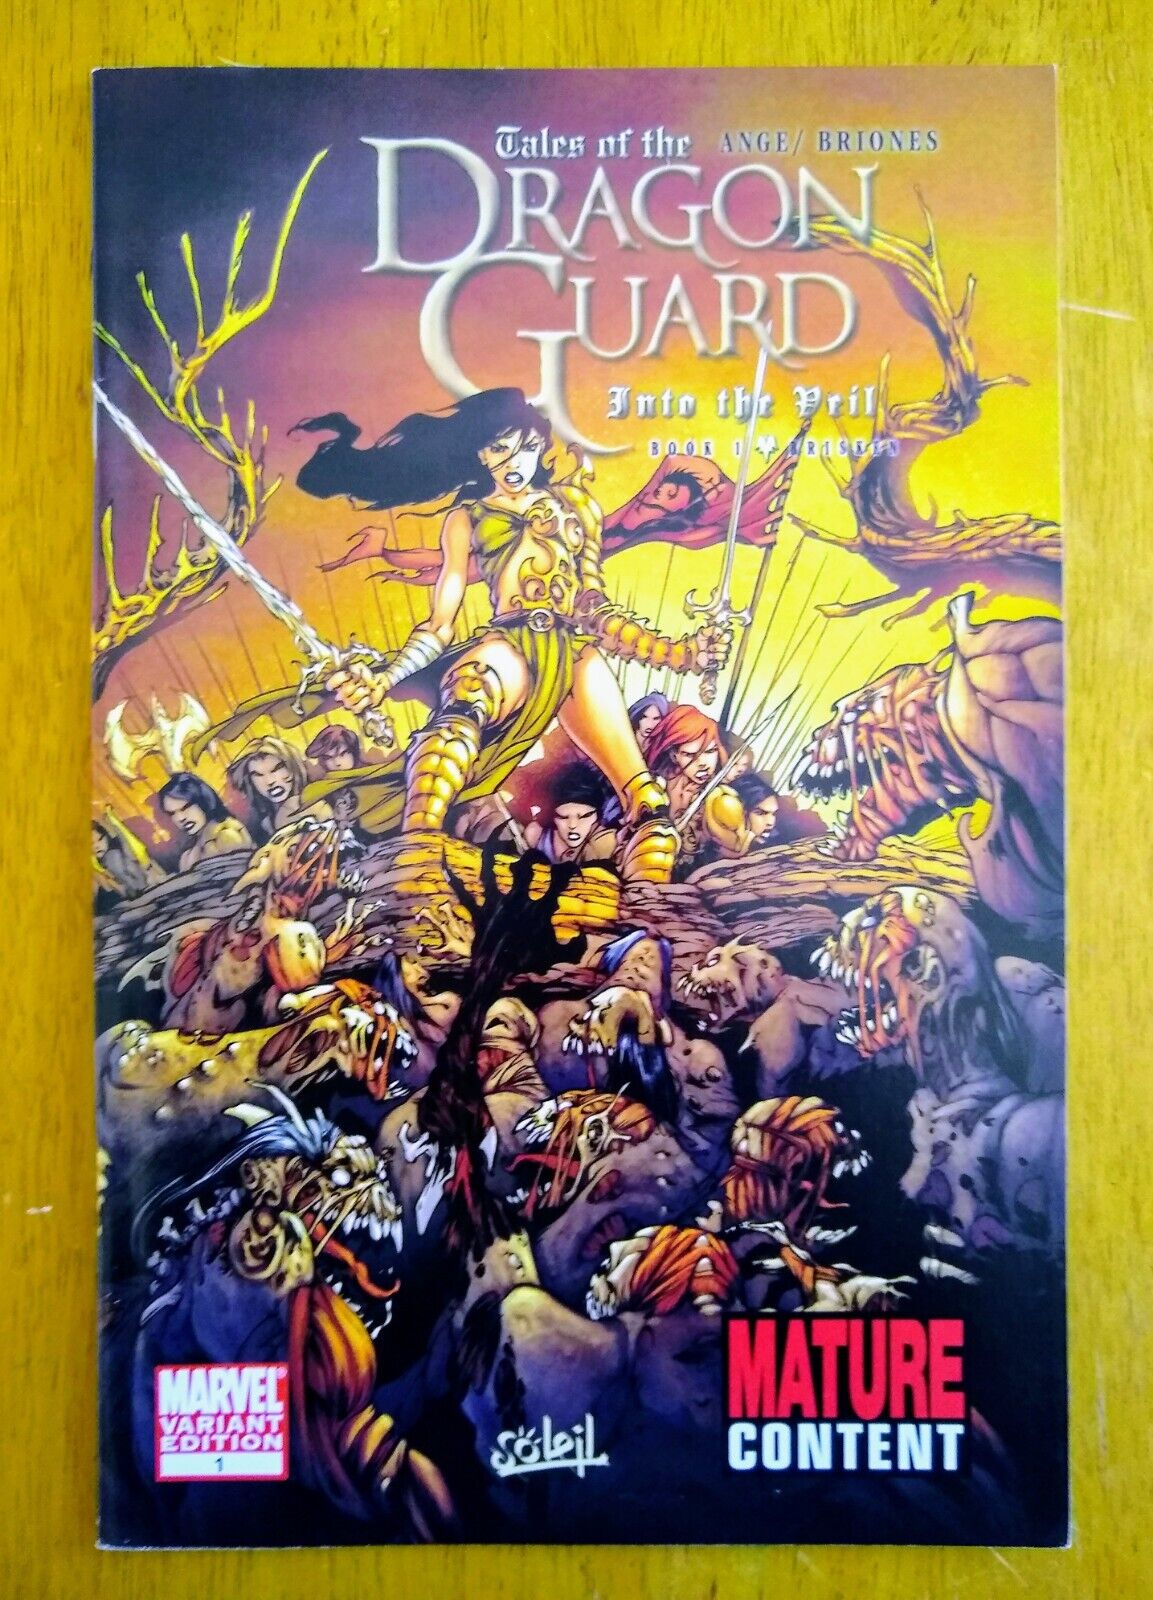 Tales of the Dragon Guard #1B Into the Veil 2010 Marvel Comic Book Ange Briones